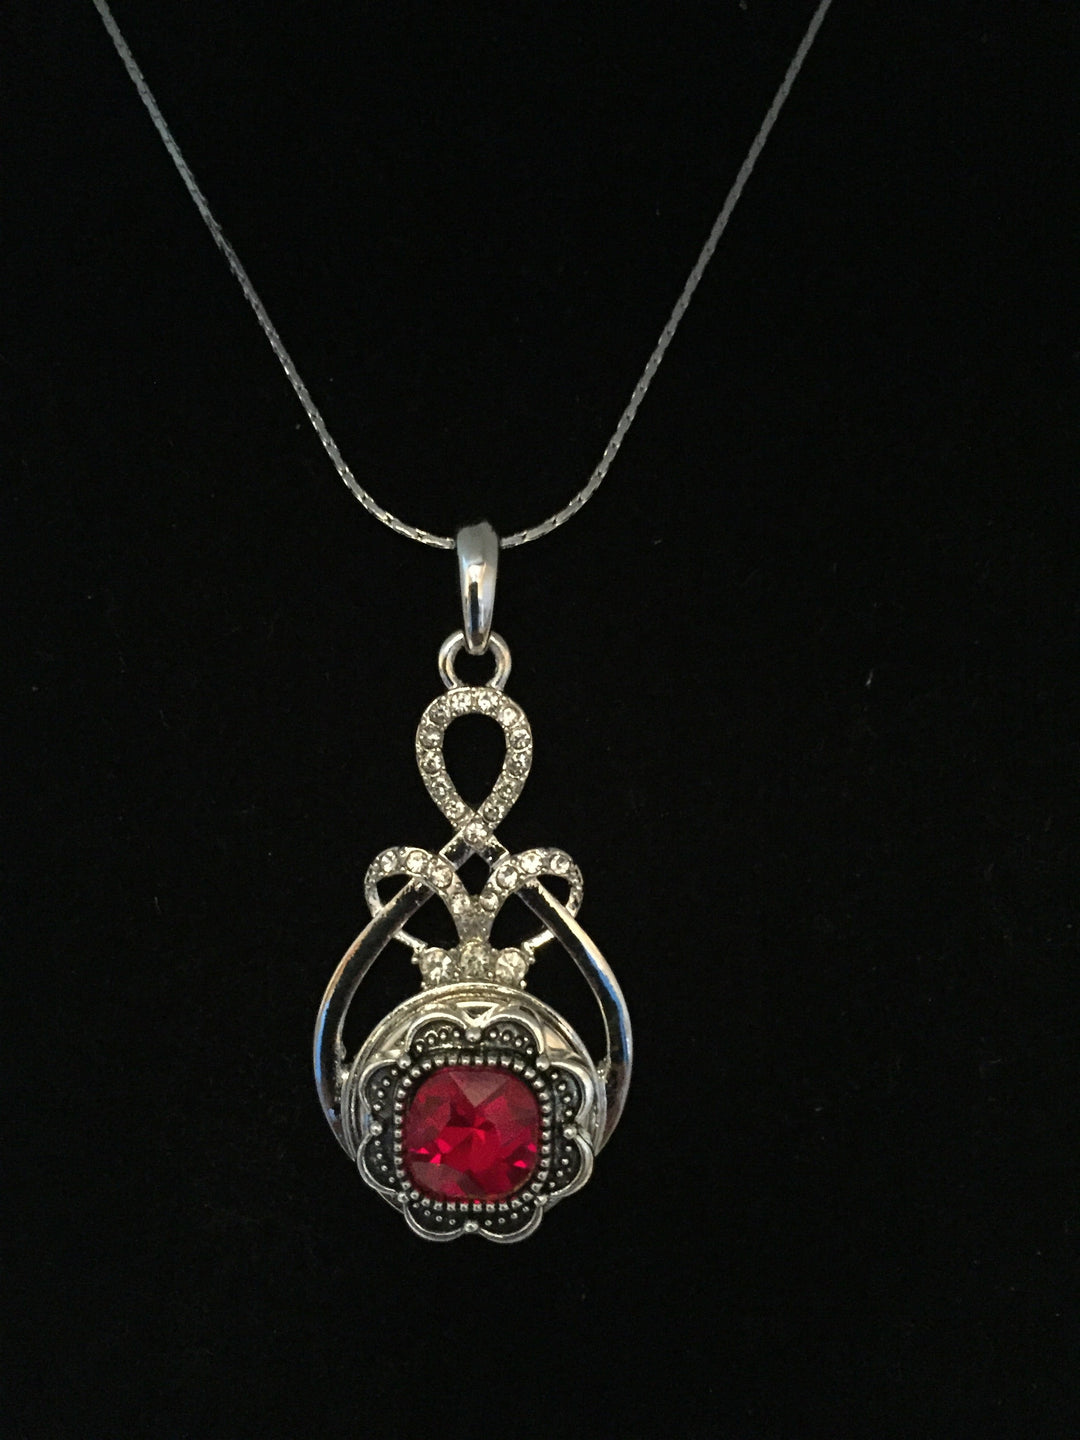 Love knot necklace with red gem snap